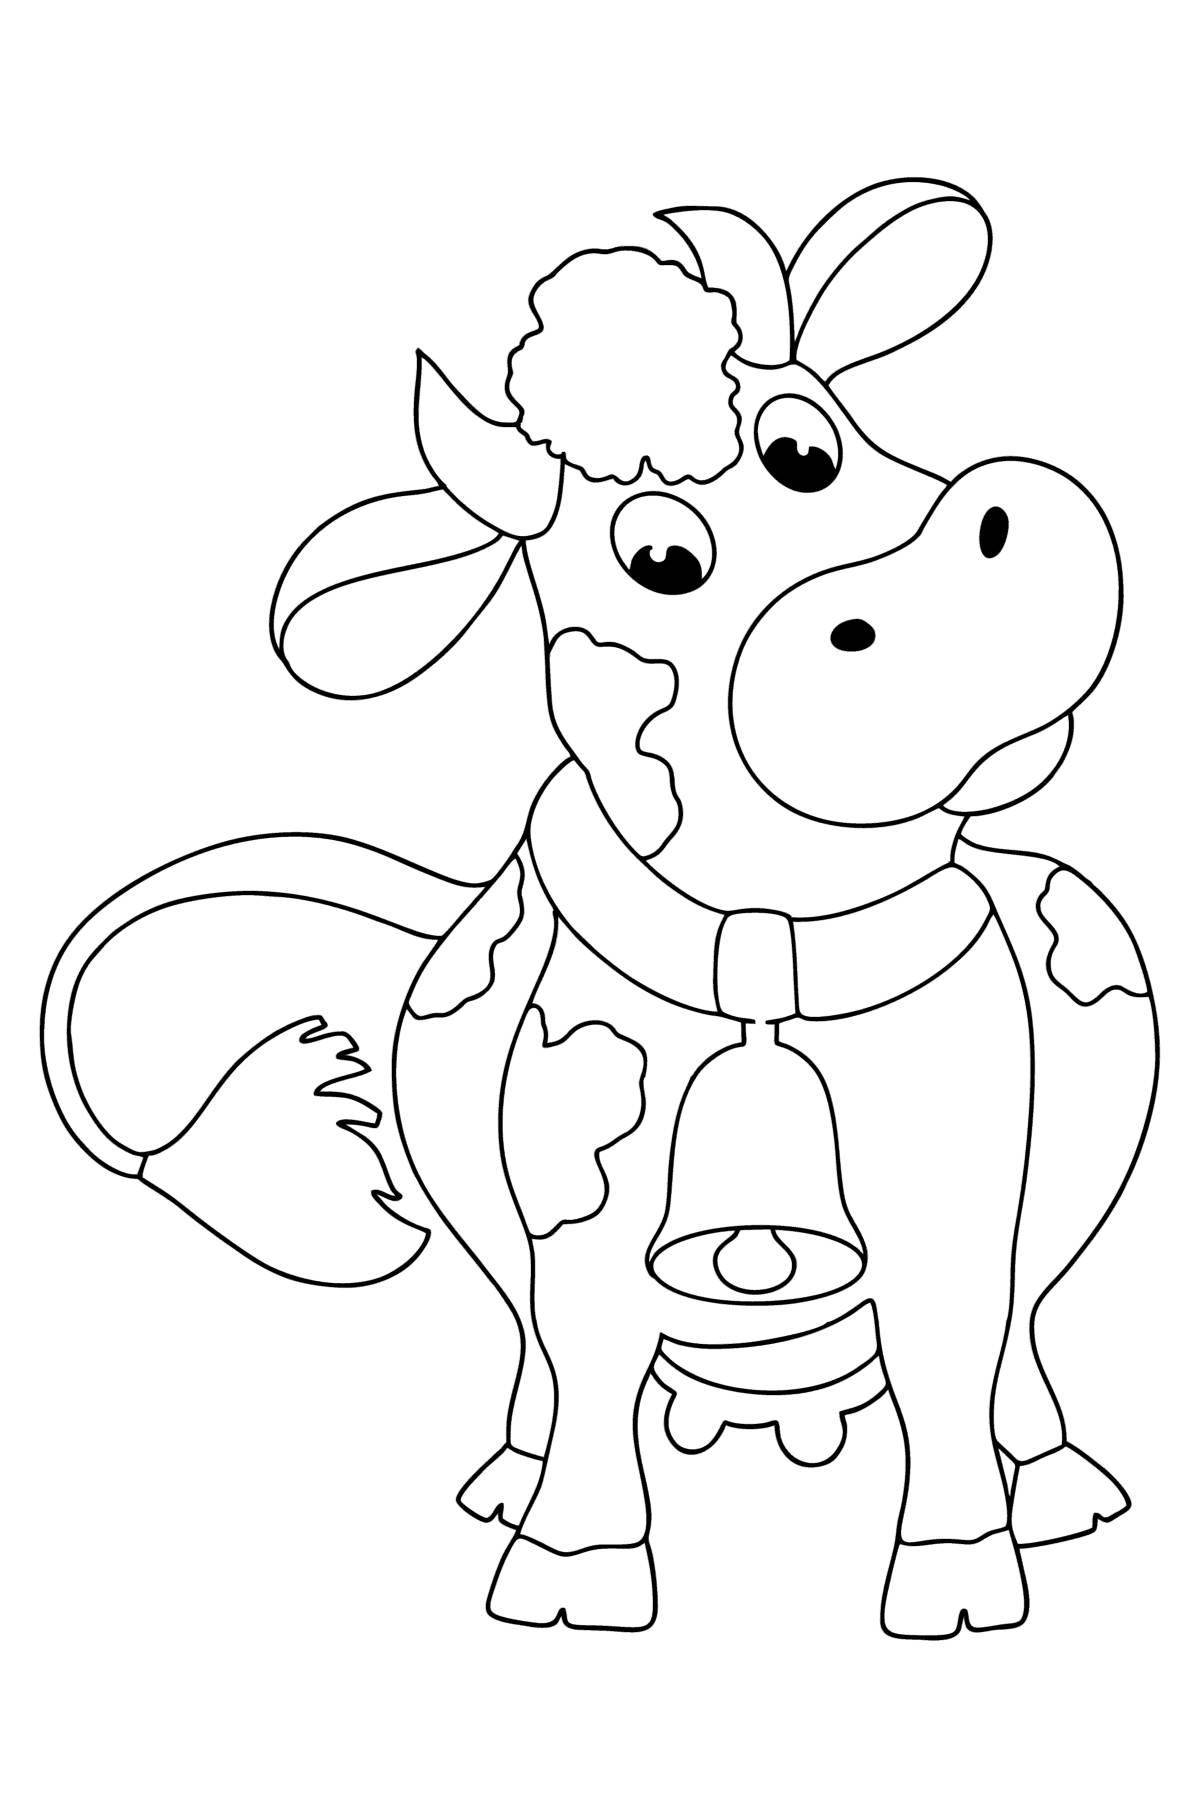 Bright cow coloring book for 3-4 year olds